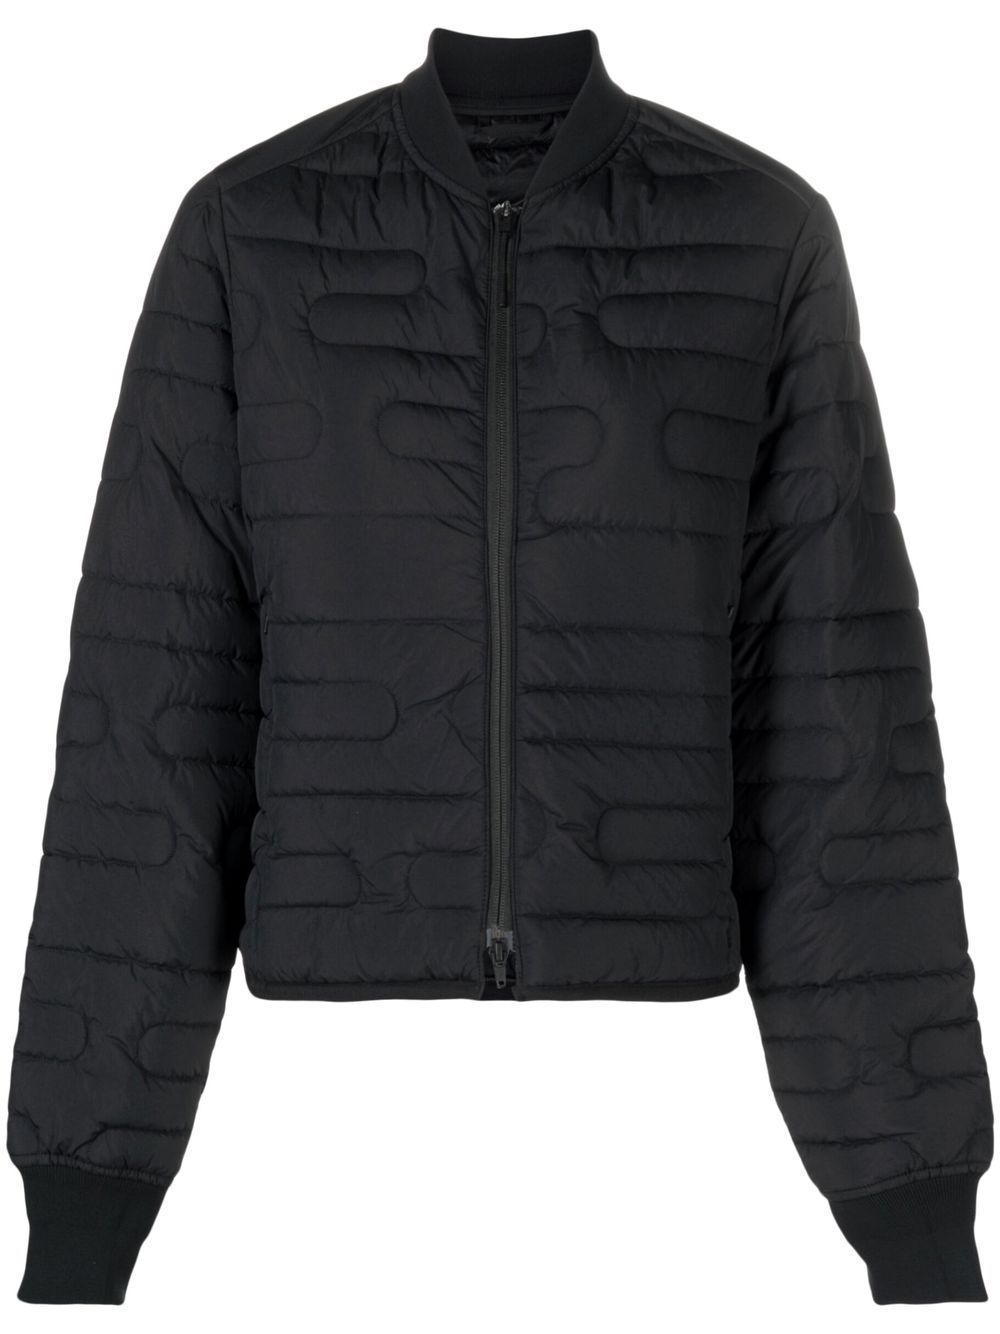 Y-3 quilted bomber jacket | Smart Closet